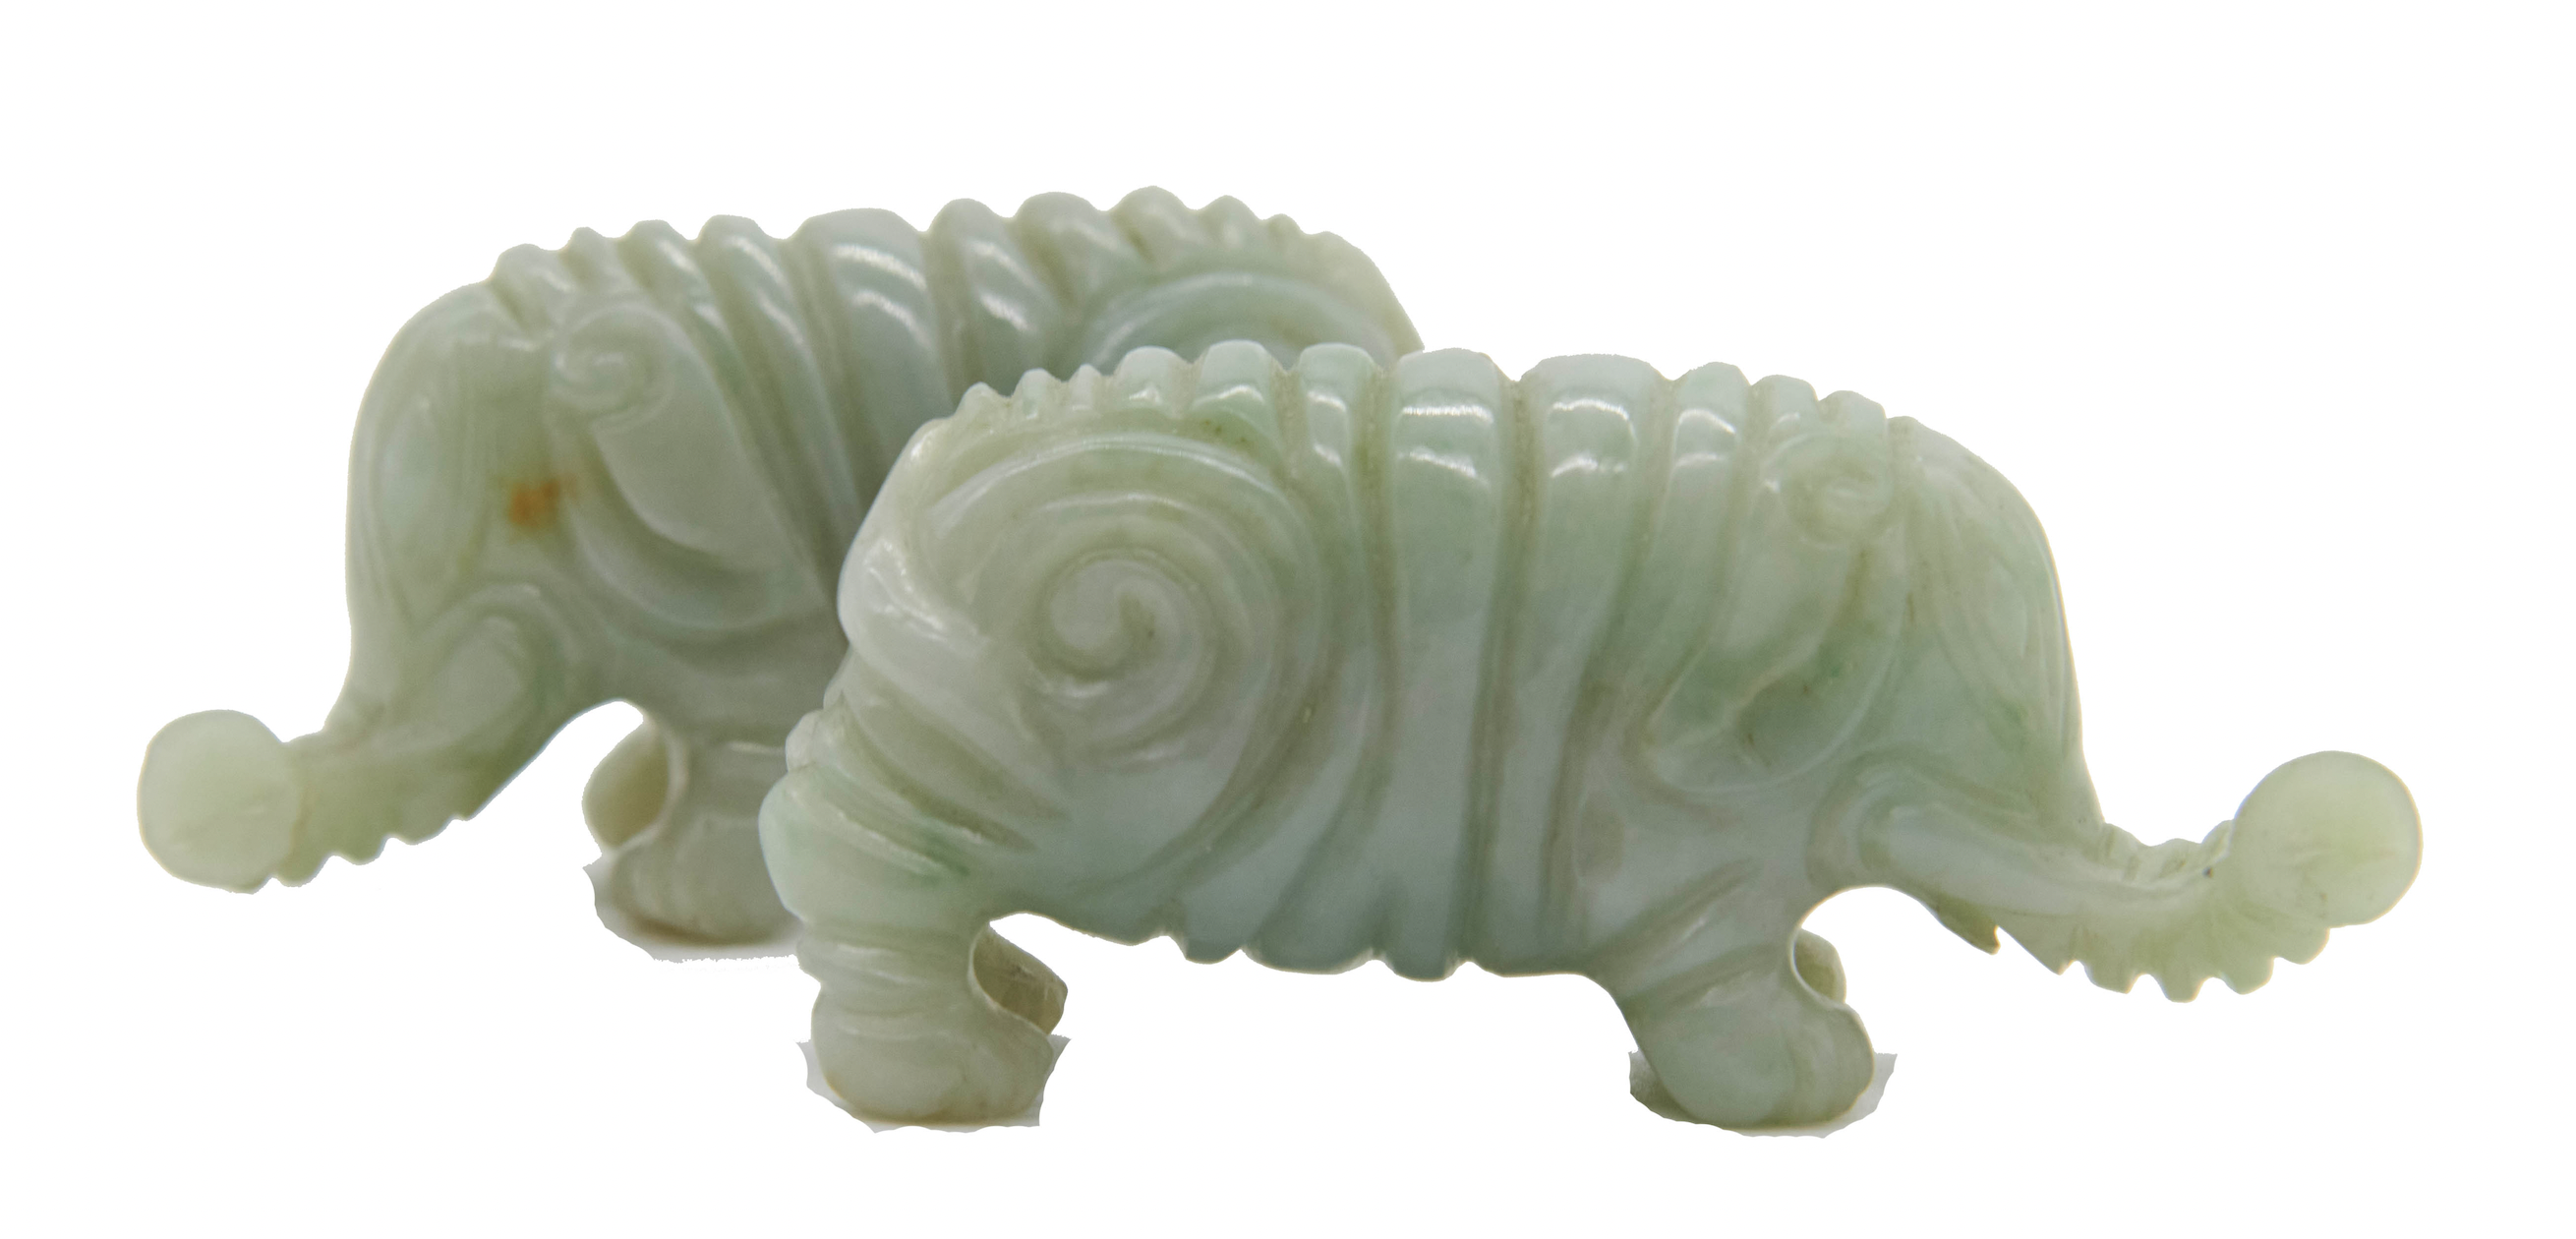 Pair of 19th-century Chinese carved green jade elephants, est. $700-$900